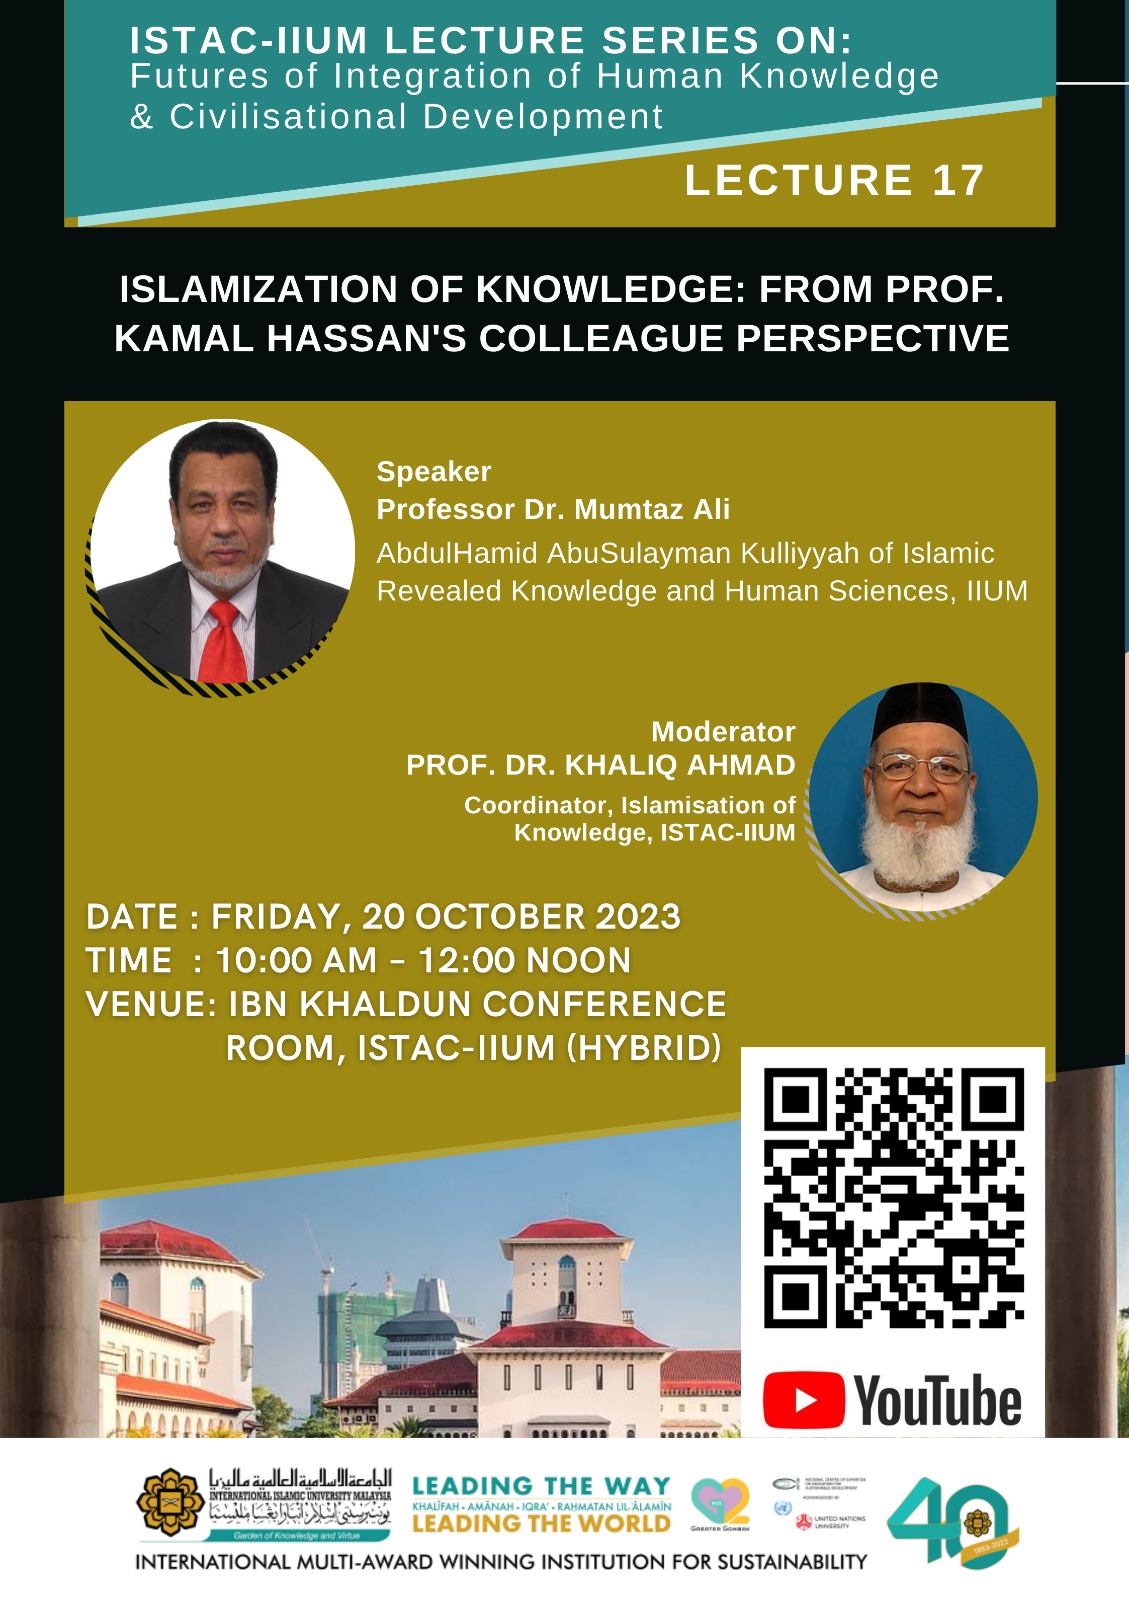 ISLAMIZATION OF KNOWLEDGE:FRAME PROF.KAMAL HASSAN'S COLLEAGUE PERSPECTIVE